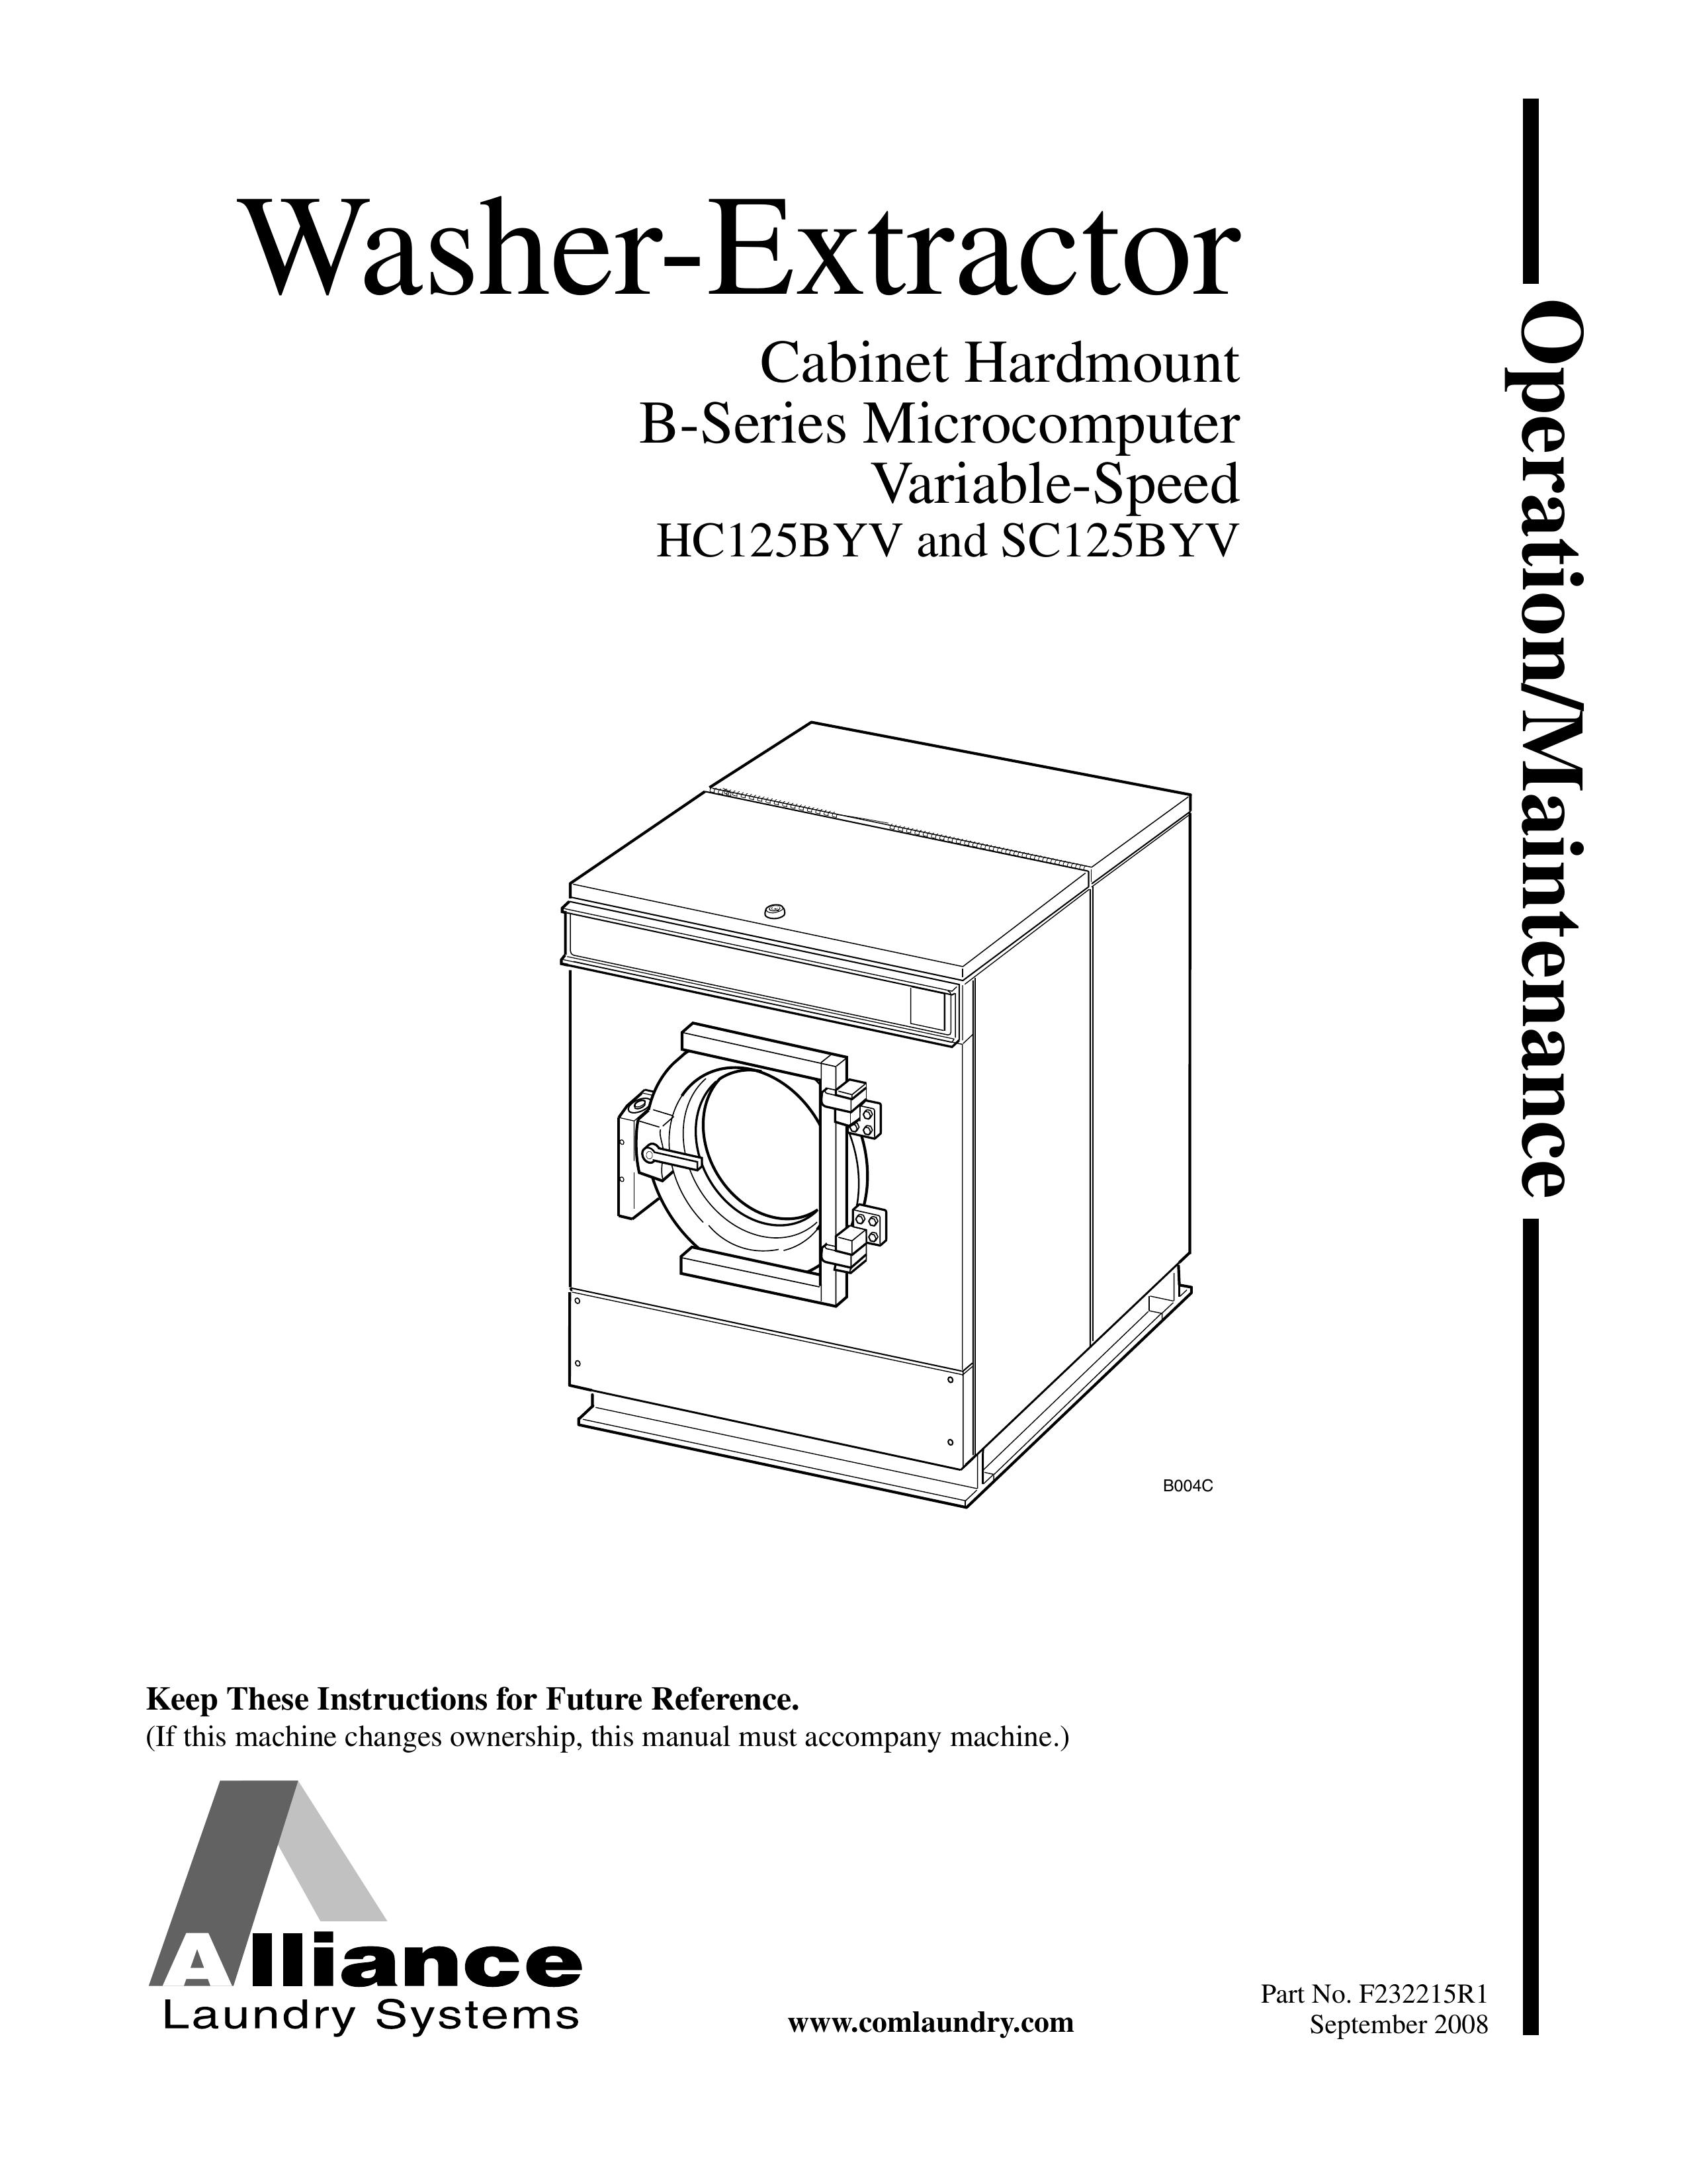 Alliance Laundry Systems SC125BYV Washer/Dryer User Manual